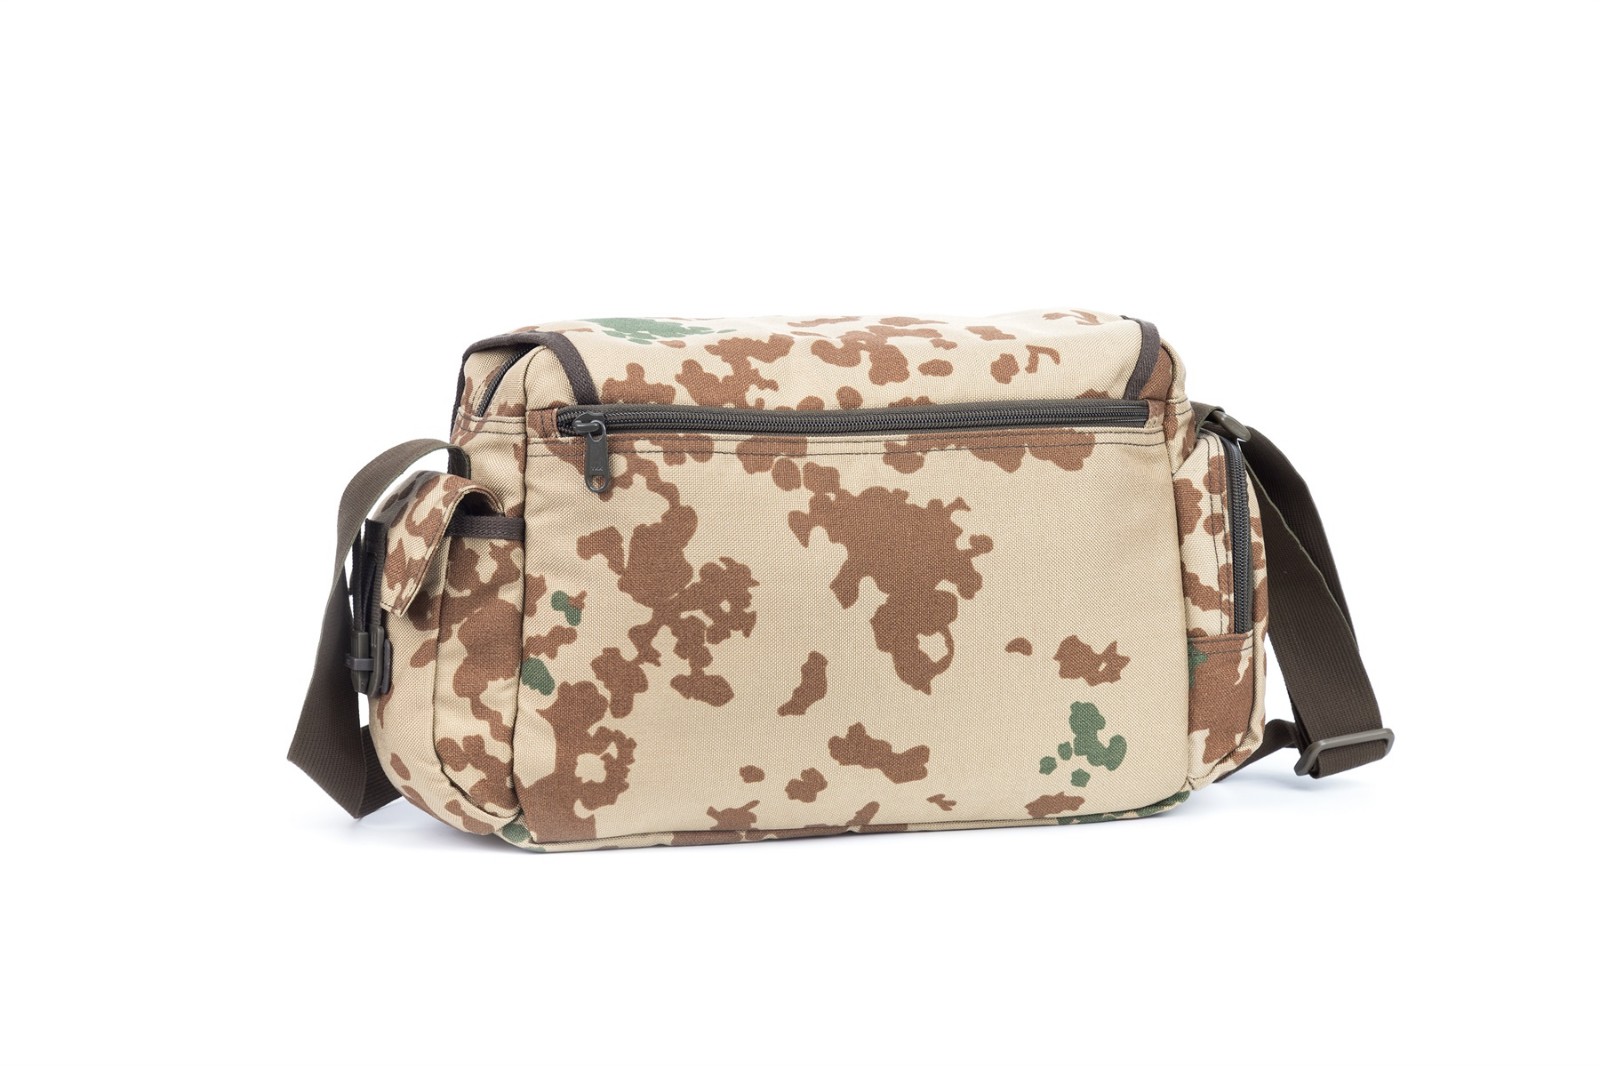 GF bags-Find Military Gear Bags Military Messenger Bag From GF Bags-5